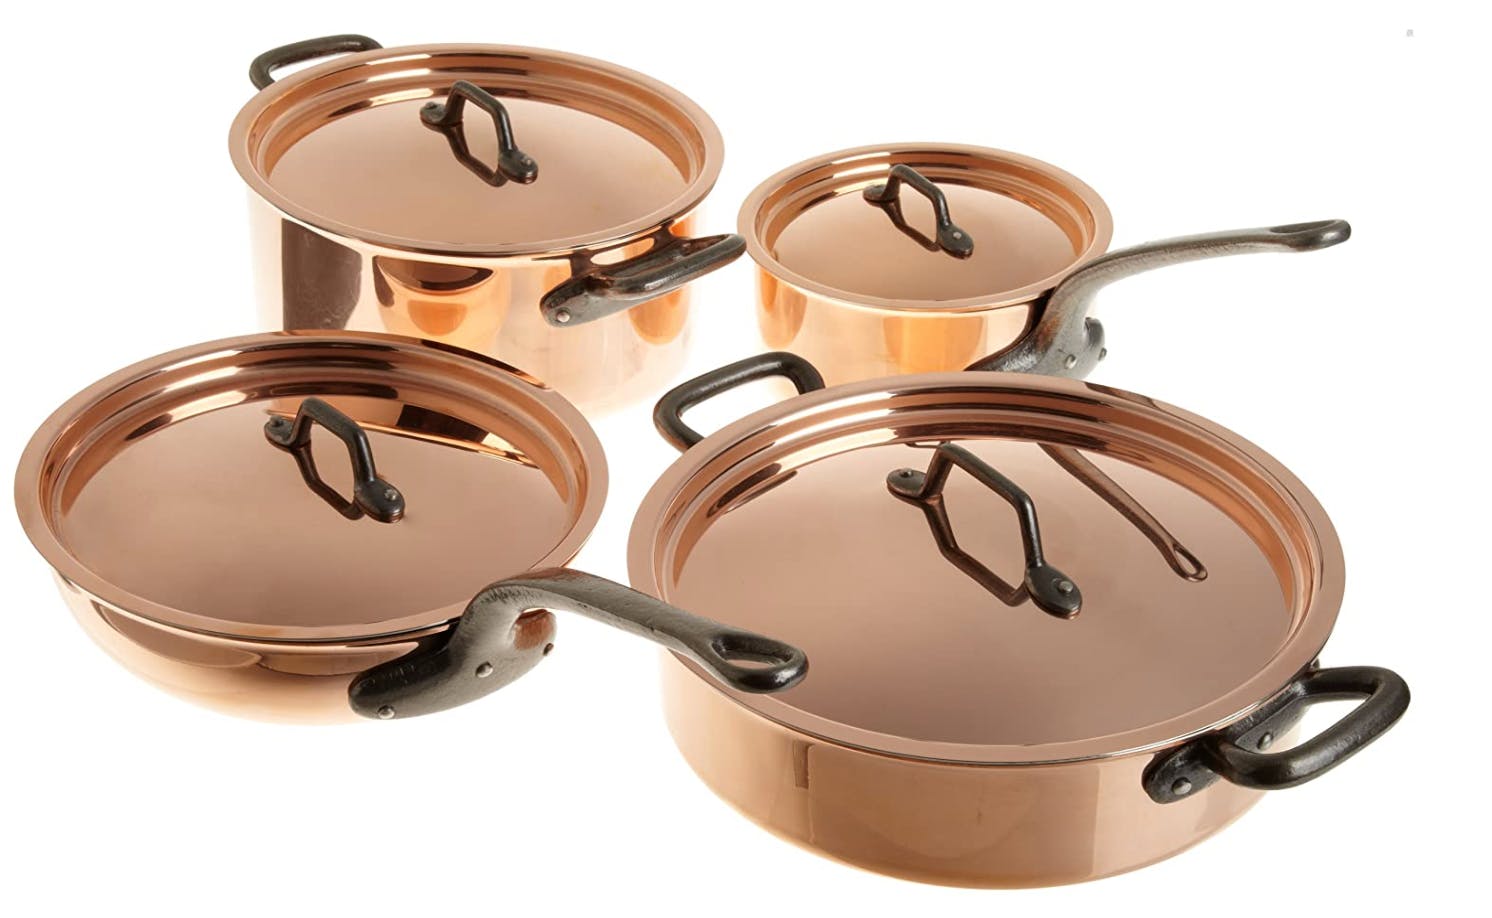 What Are French Cookware Brands, And Are They Better? – The Cookware Review